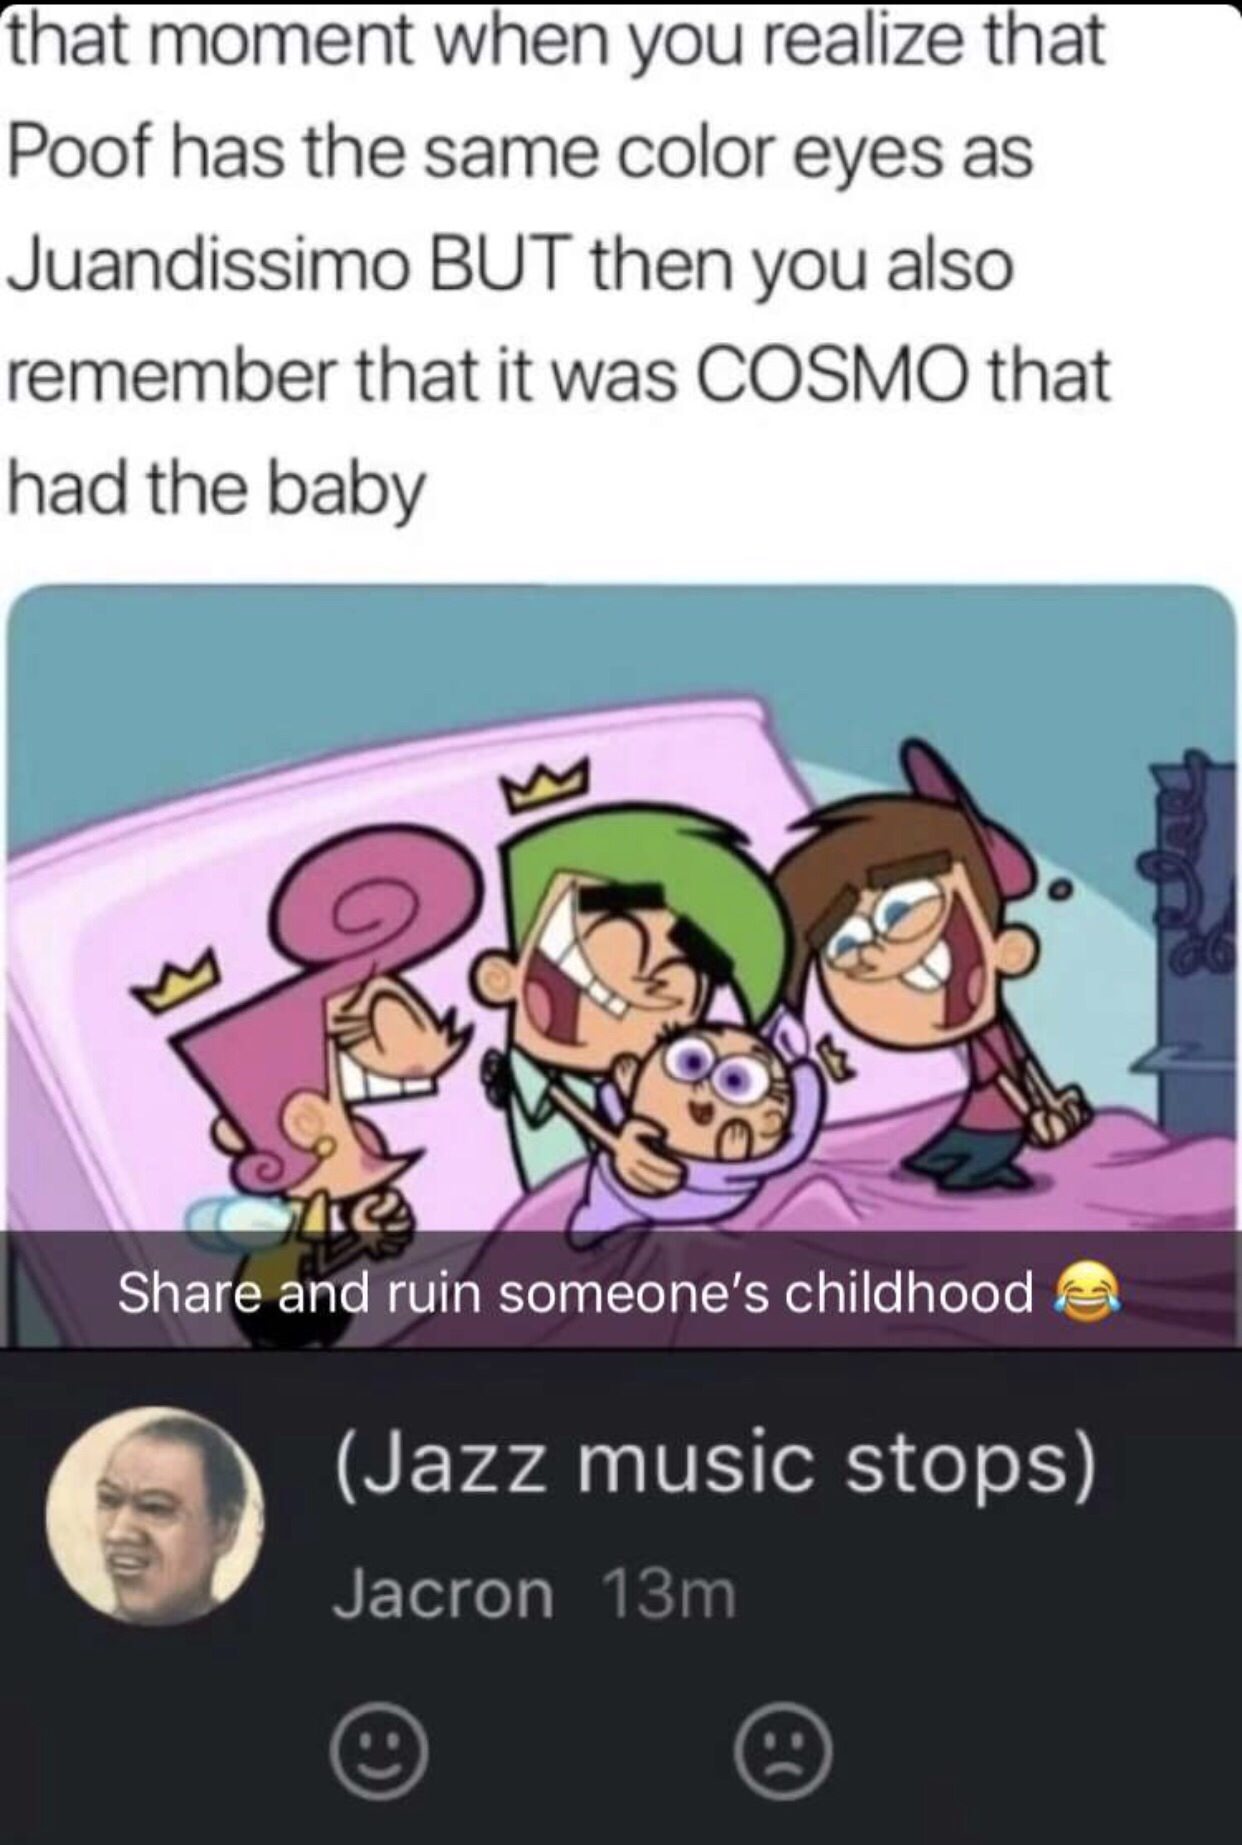 juandissimo salt bae - that moment when you realize that Poof has the same color eyes as Juandissimo But then you also remember that it was Cosmo that had the baby Ic. and ruin someone's childhood & Jazz music stops Jacron 13m